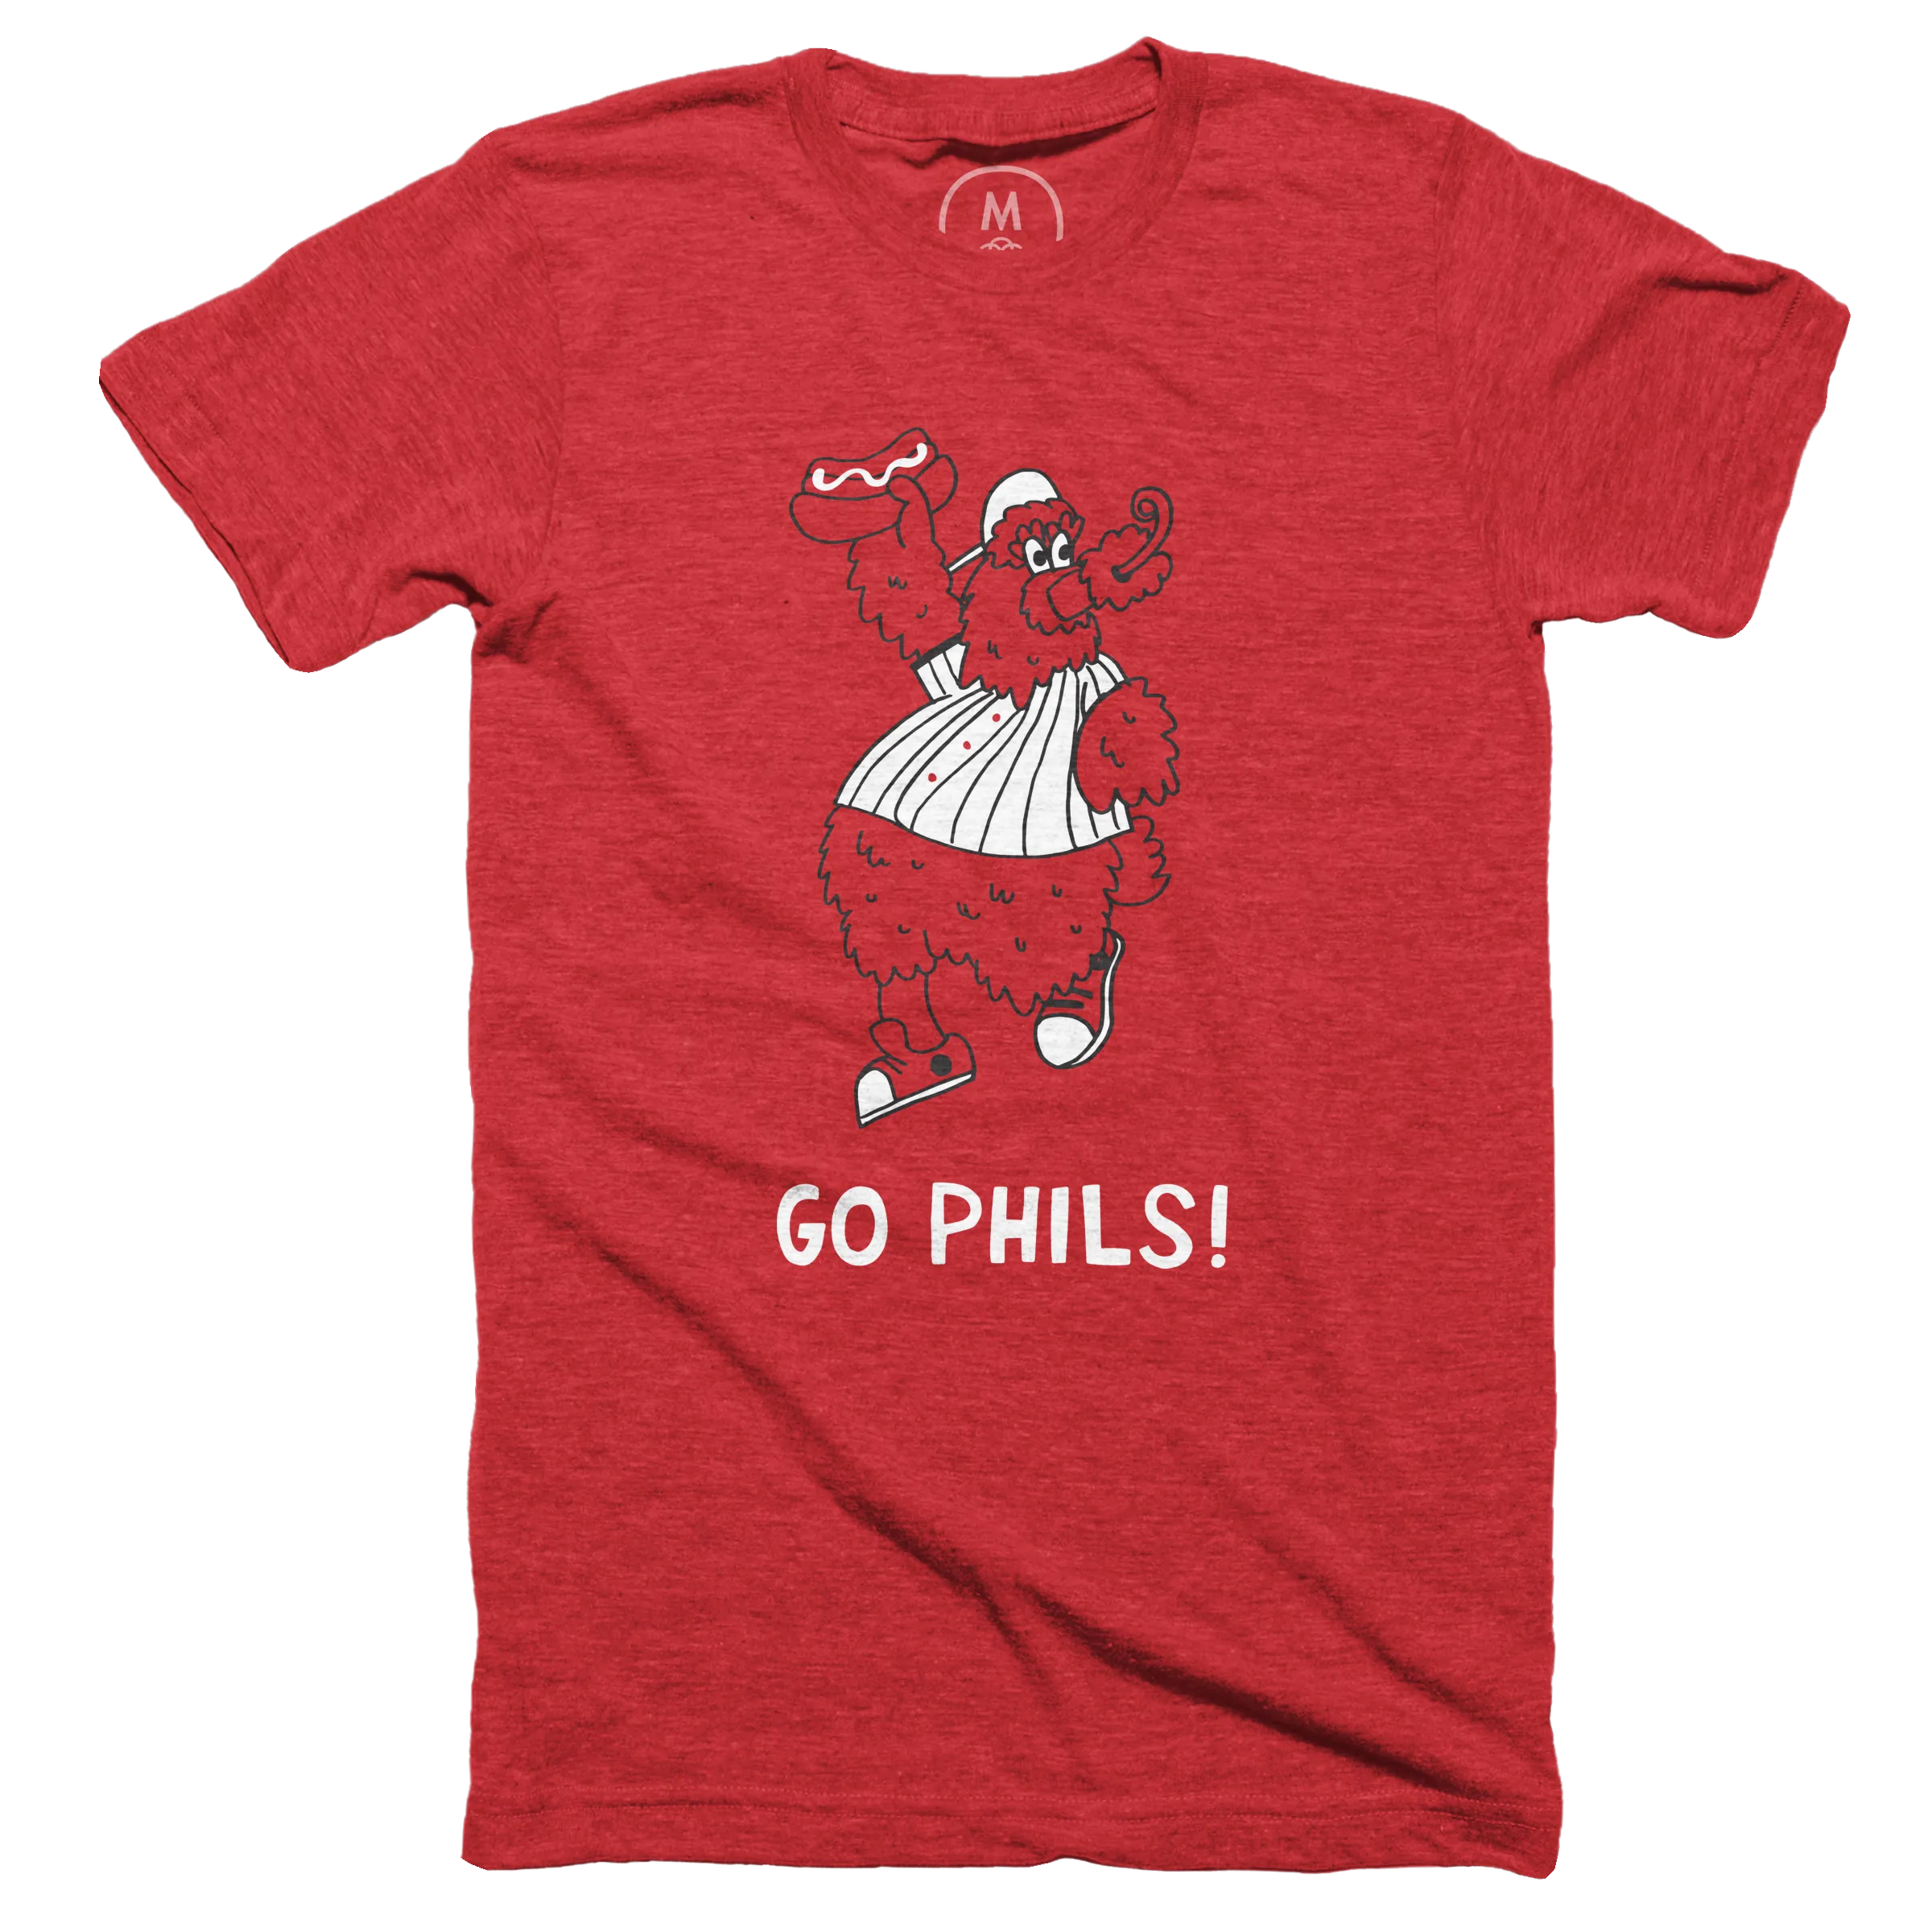 Philly Phanatic Tee” graphic tee, pullover crewneck, pullover